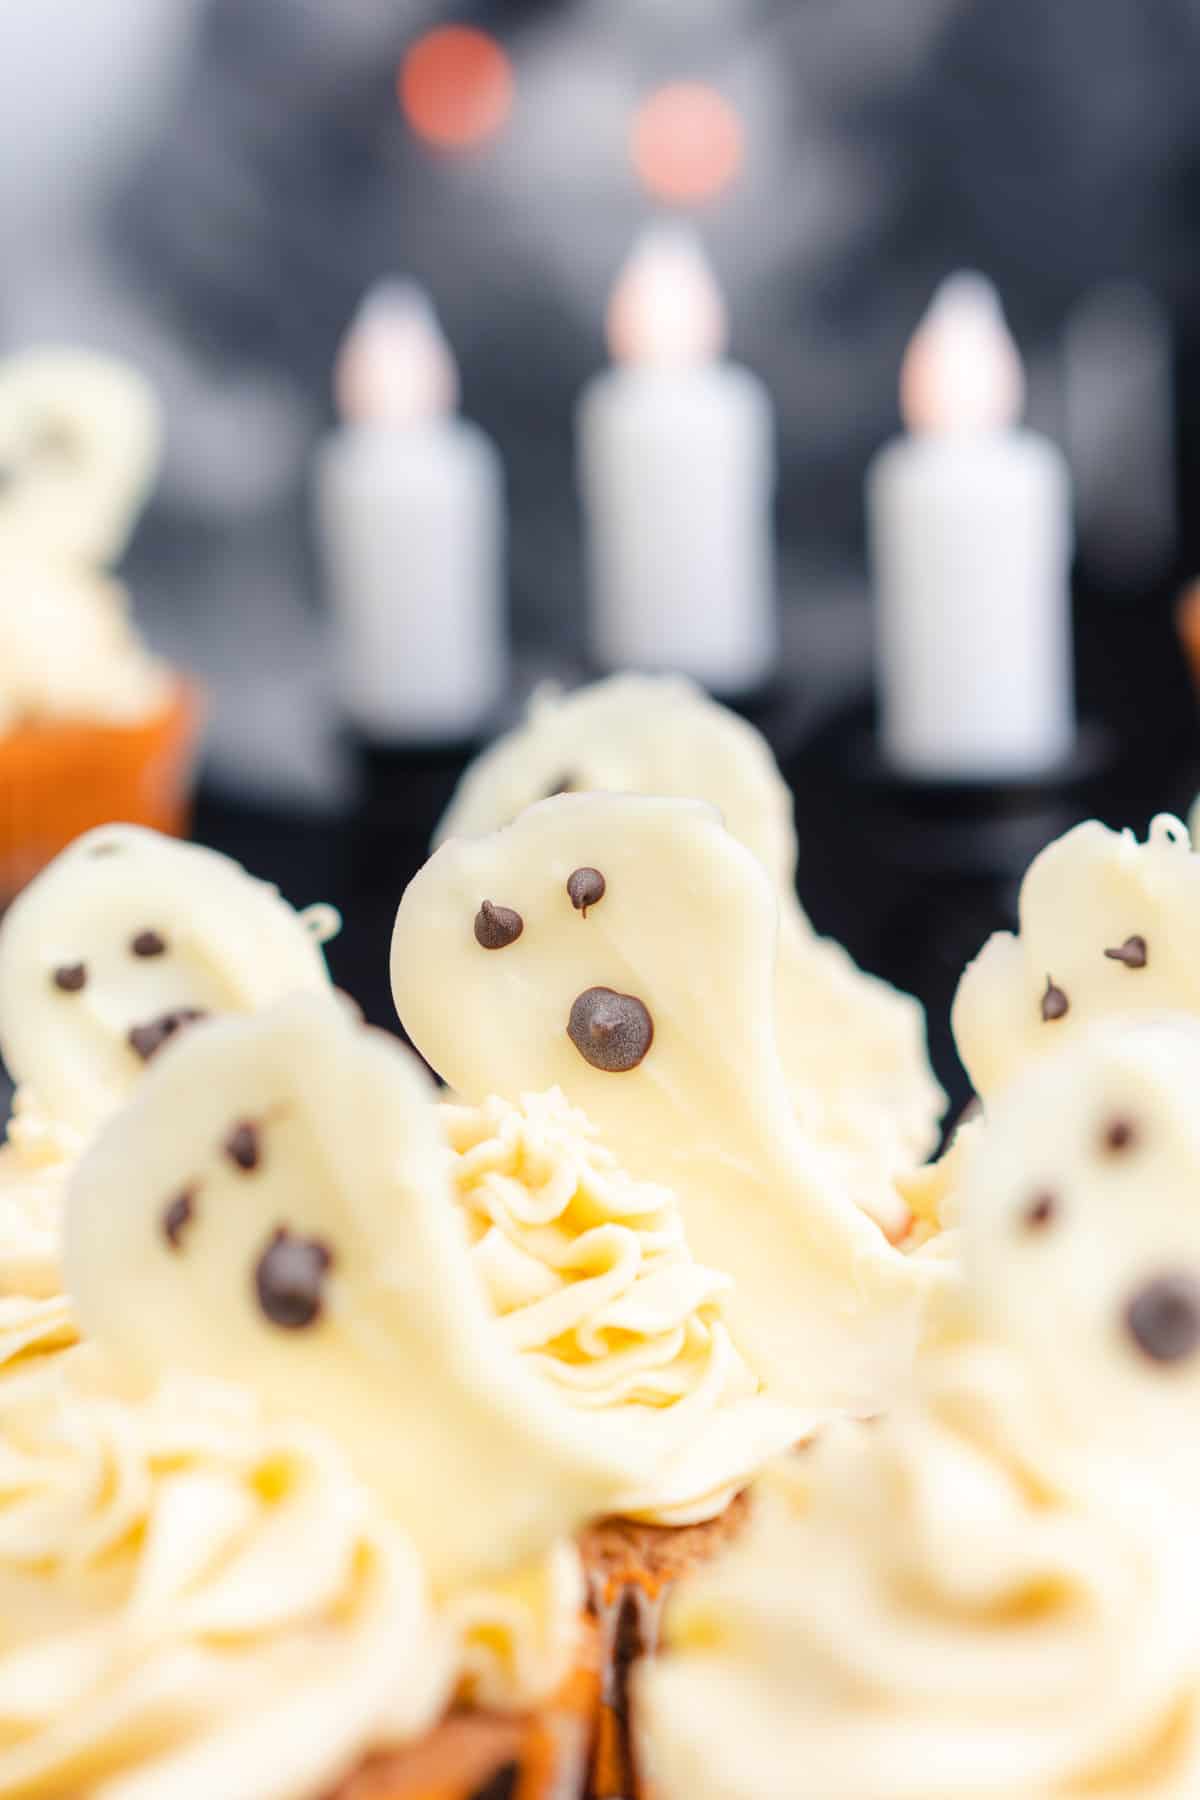 keto ghost cupcakes with candles and dry ice in the background